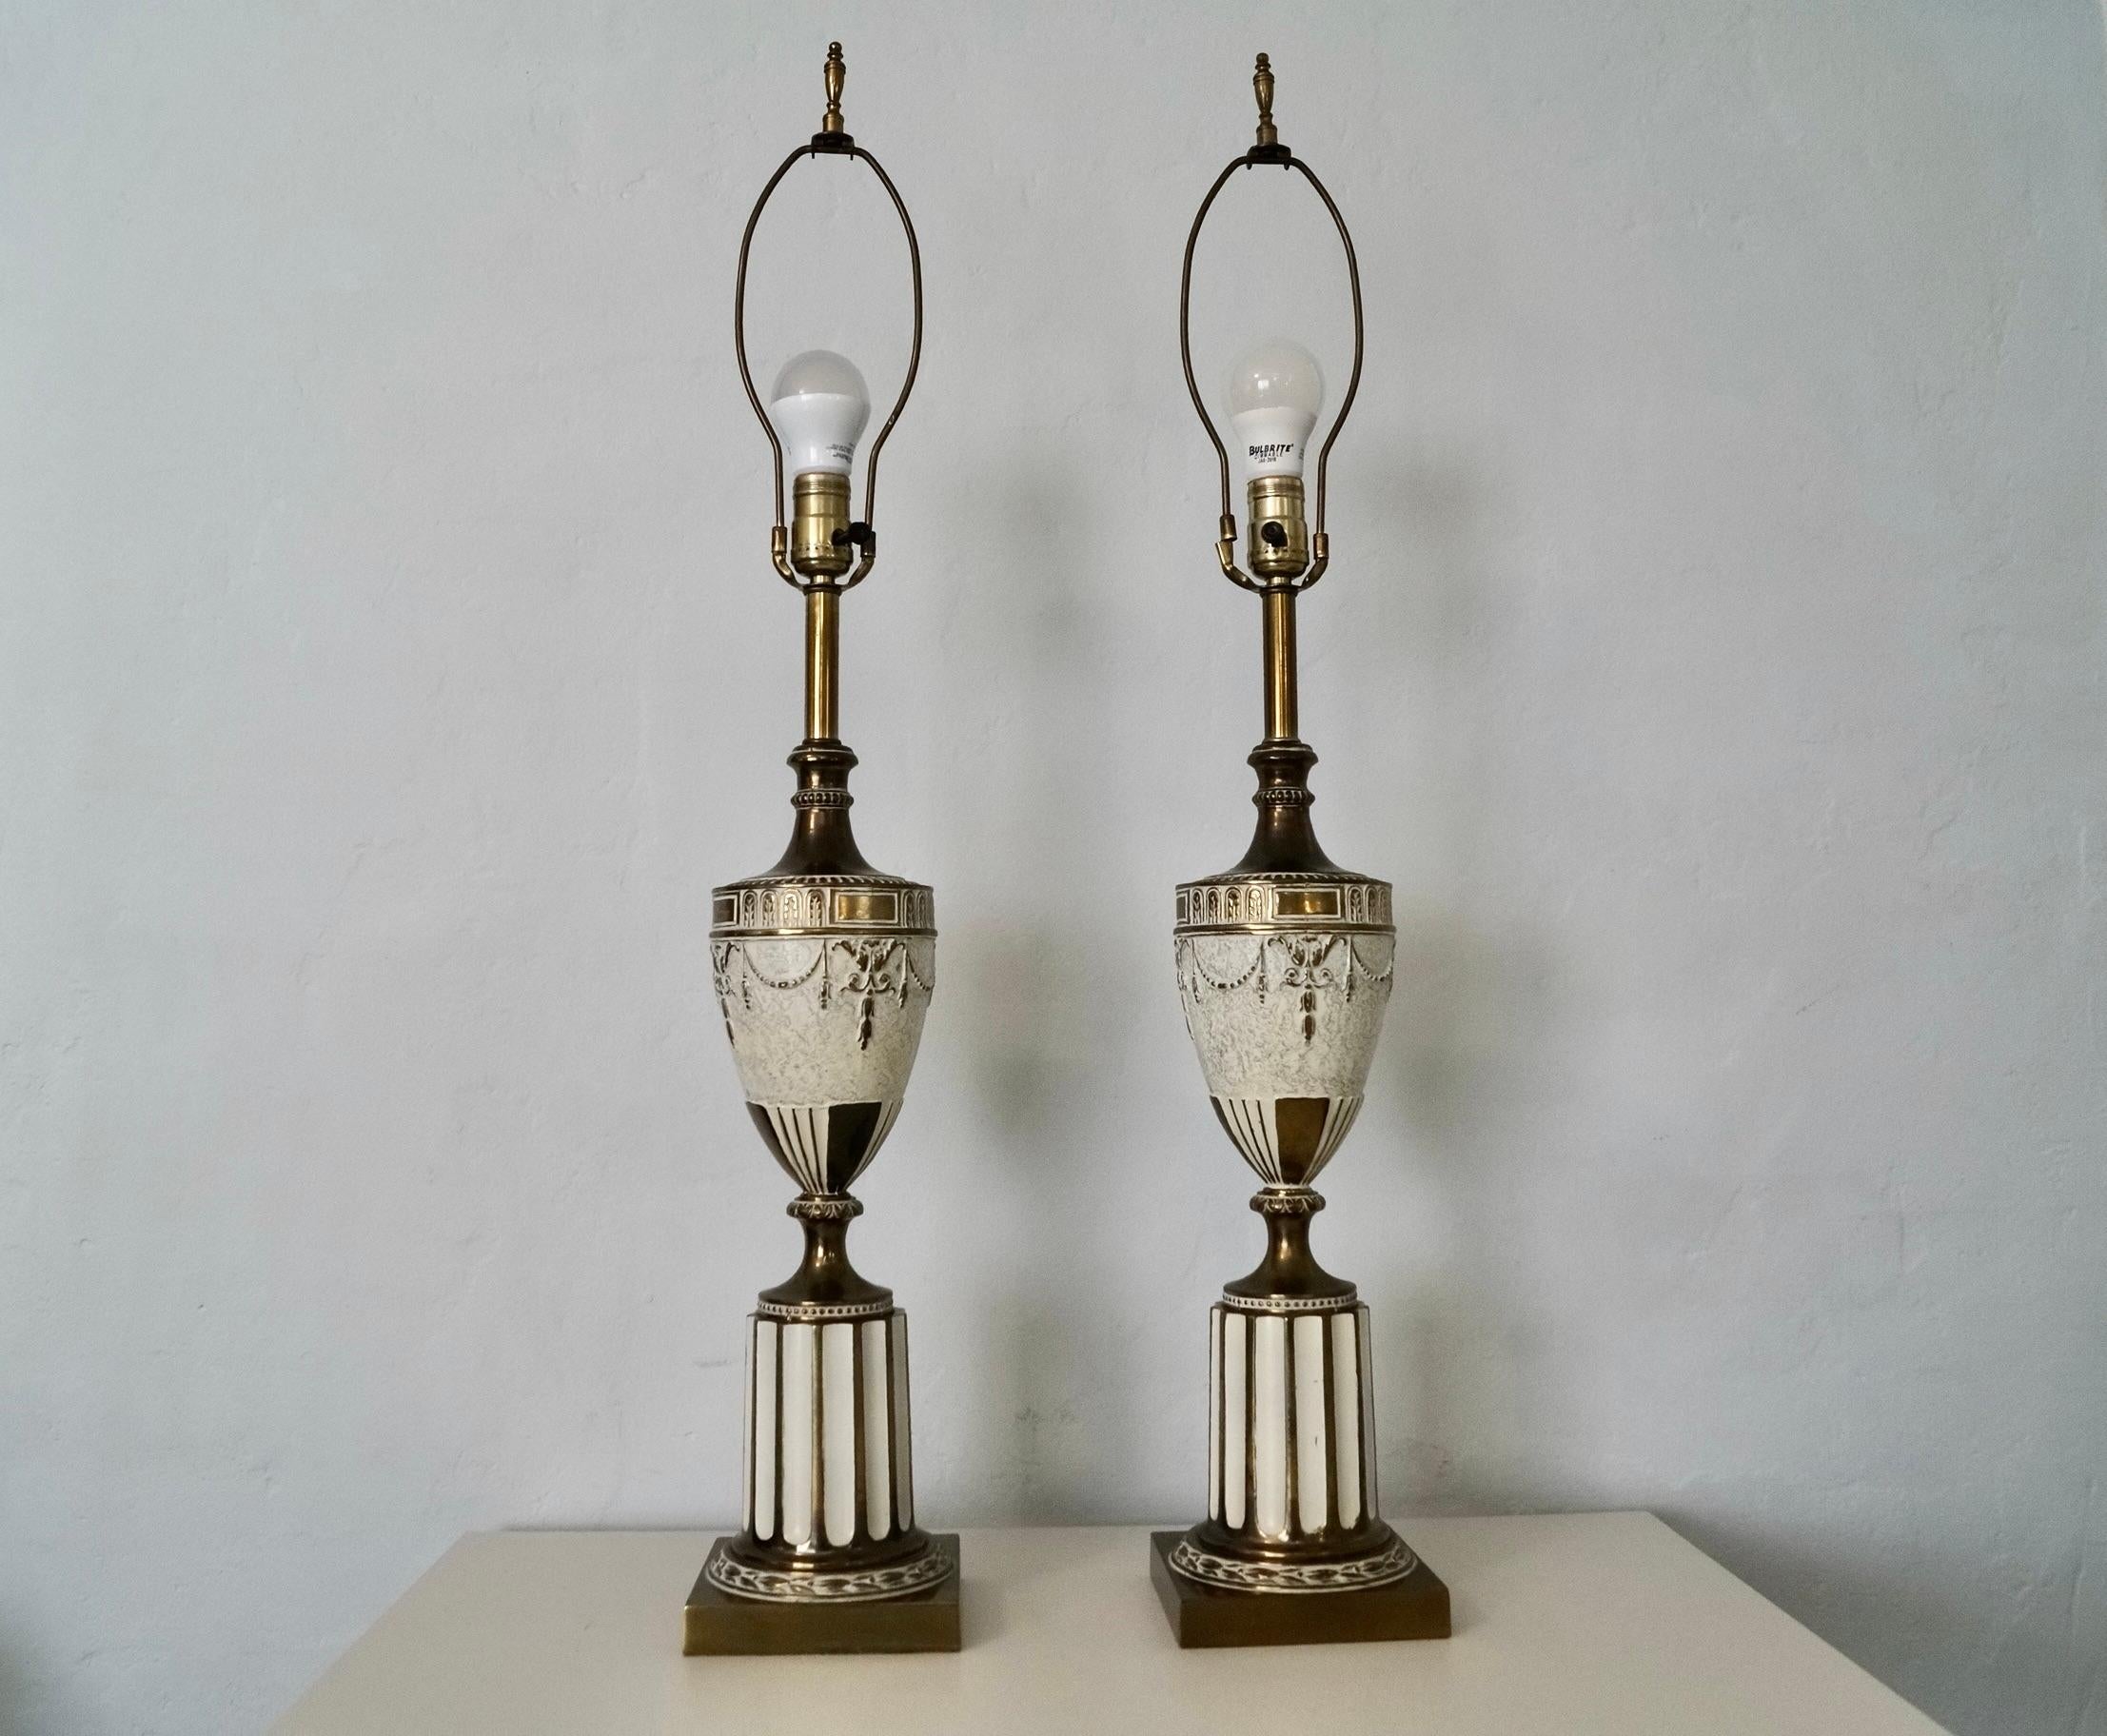 Neoclassical Revival Pair of 1930's Neoclassical Ancient Roman Inspired Table Lamps  For Sale